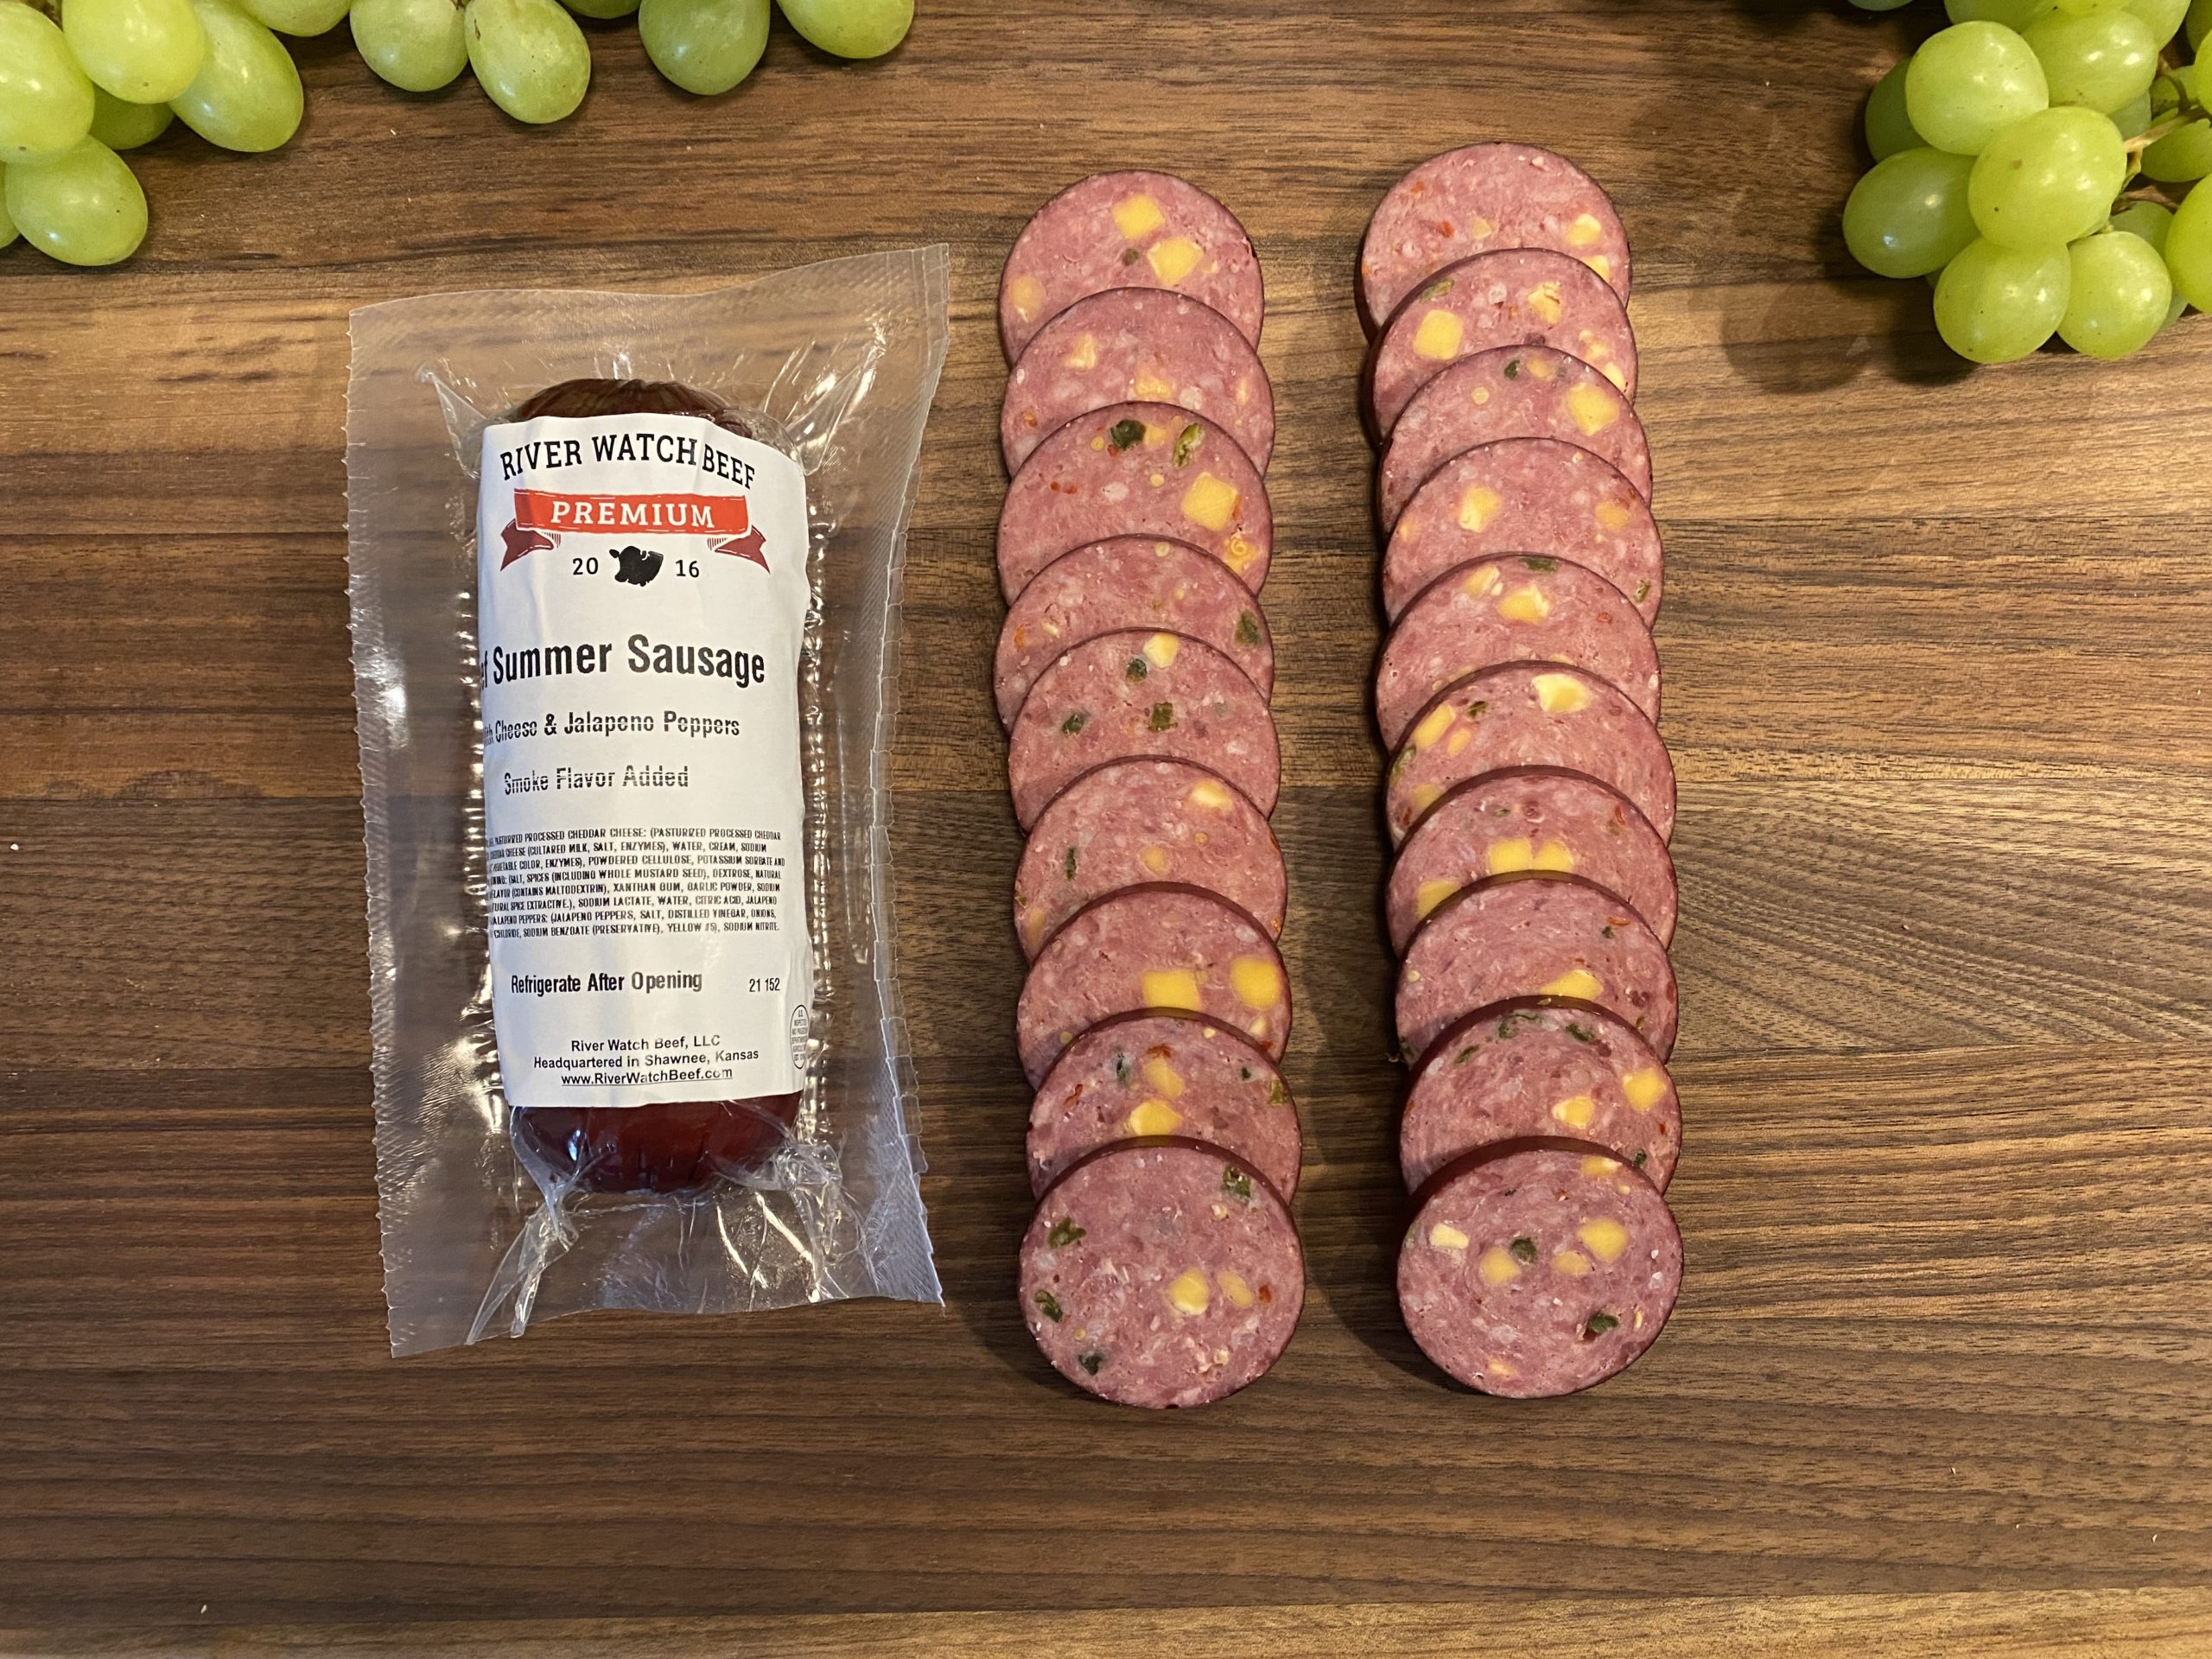 https://riverwatchbeef.com/wp-content/uploads/2021/06/Summer-Sausage-Cheese-Jalapeno-scaled.jpg